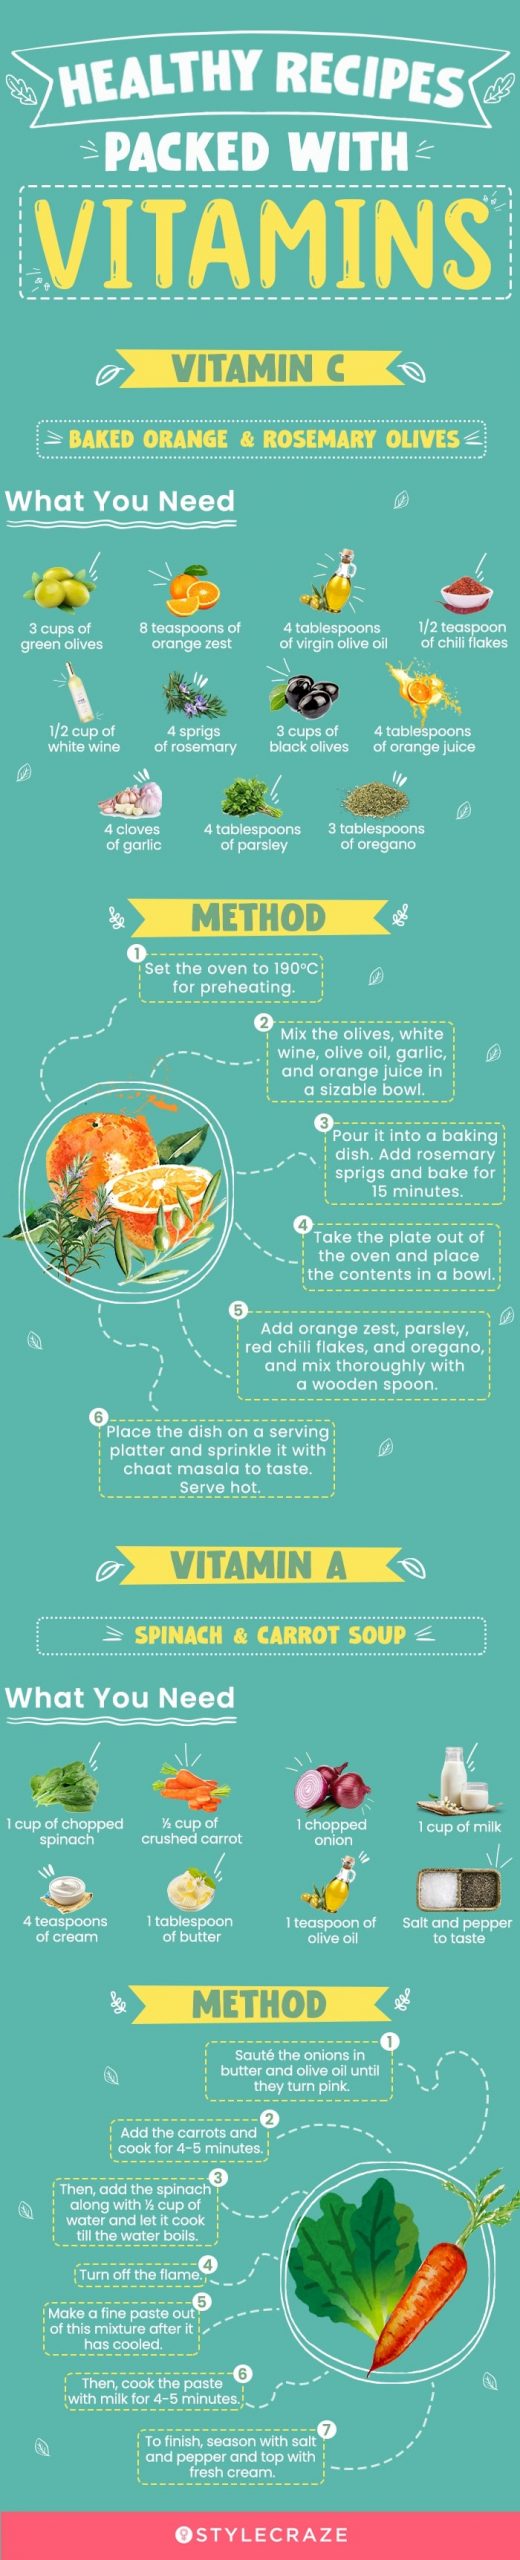 healthy recipes packed with vitamins (infographic)